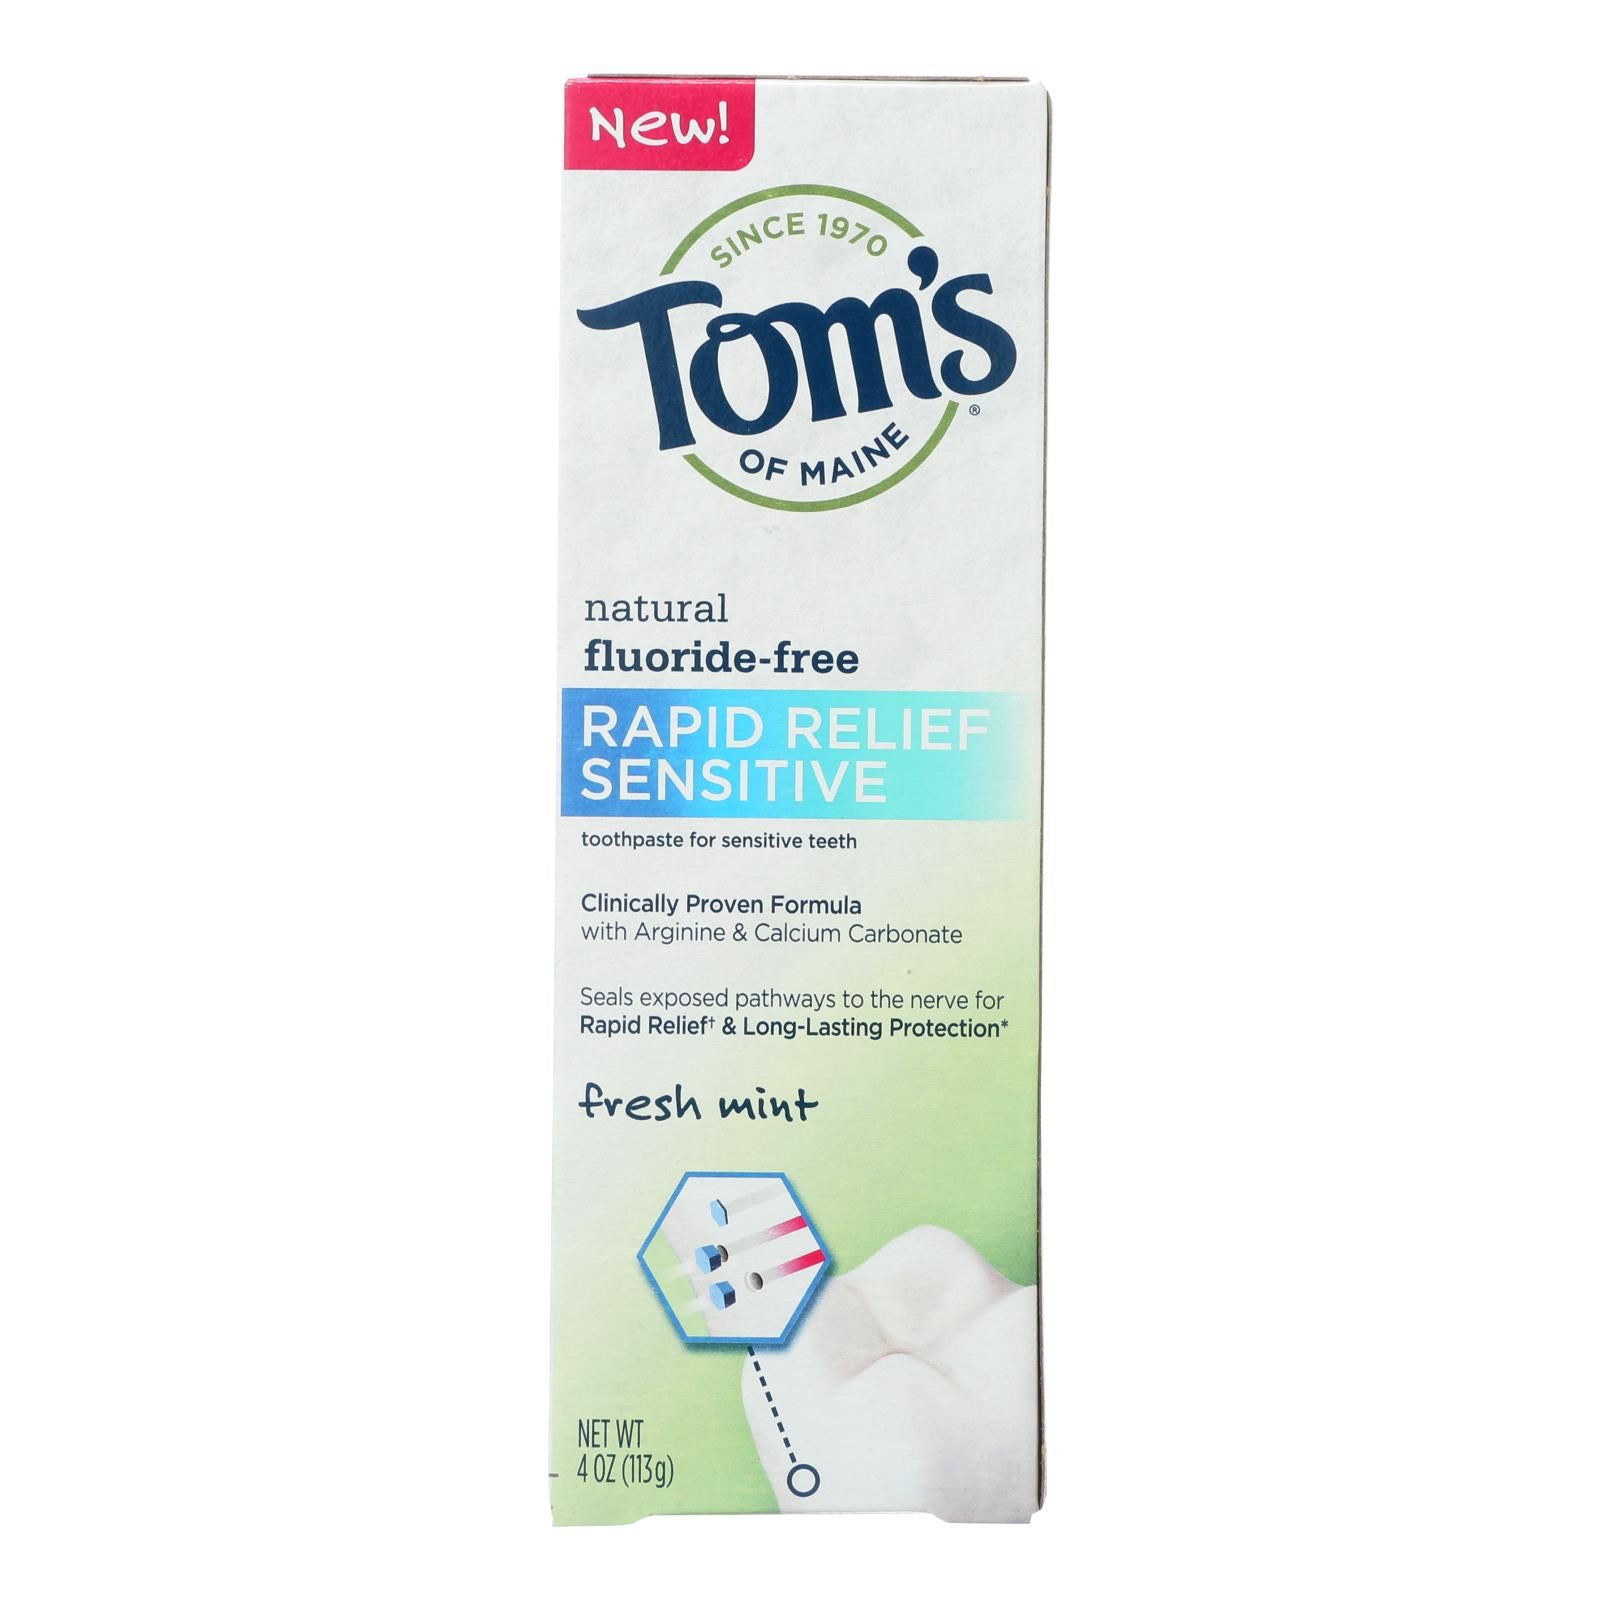 Tom's Of Maine Rapid Relief Sensitive Toothpaste - Fresh Mint Fluoride-free - Case Of 6 - 4 Oz. - Whole Green Foods